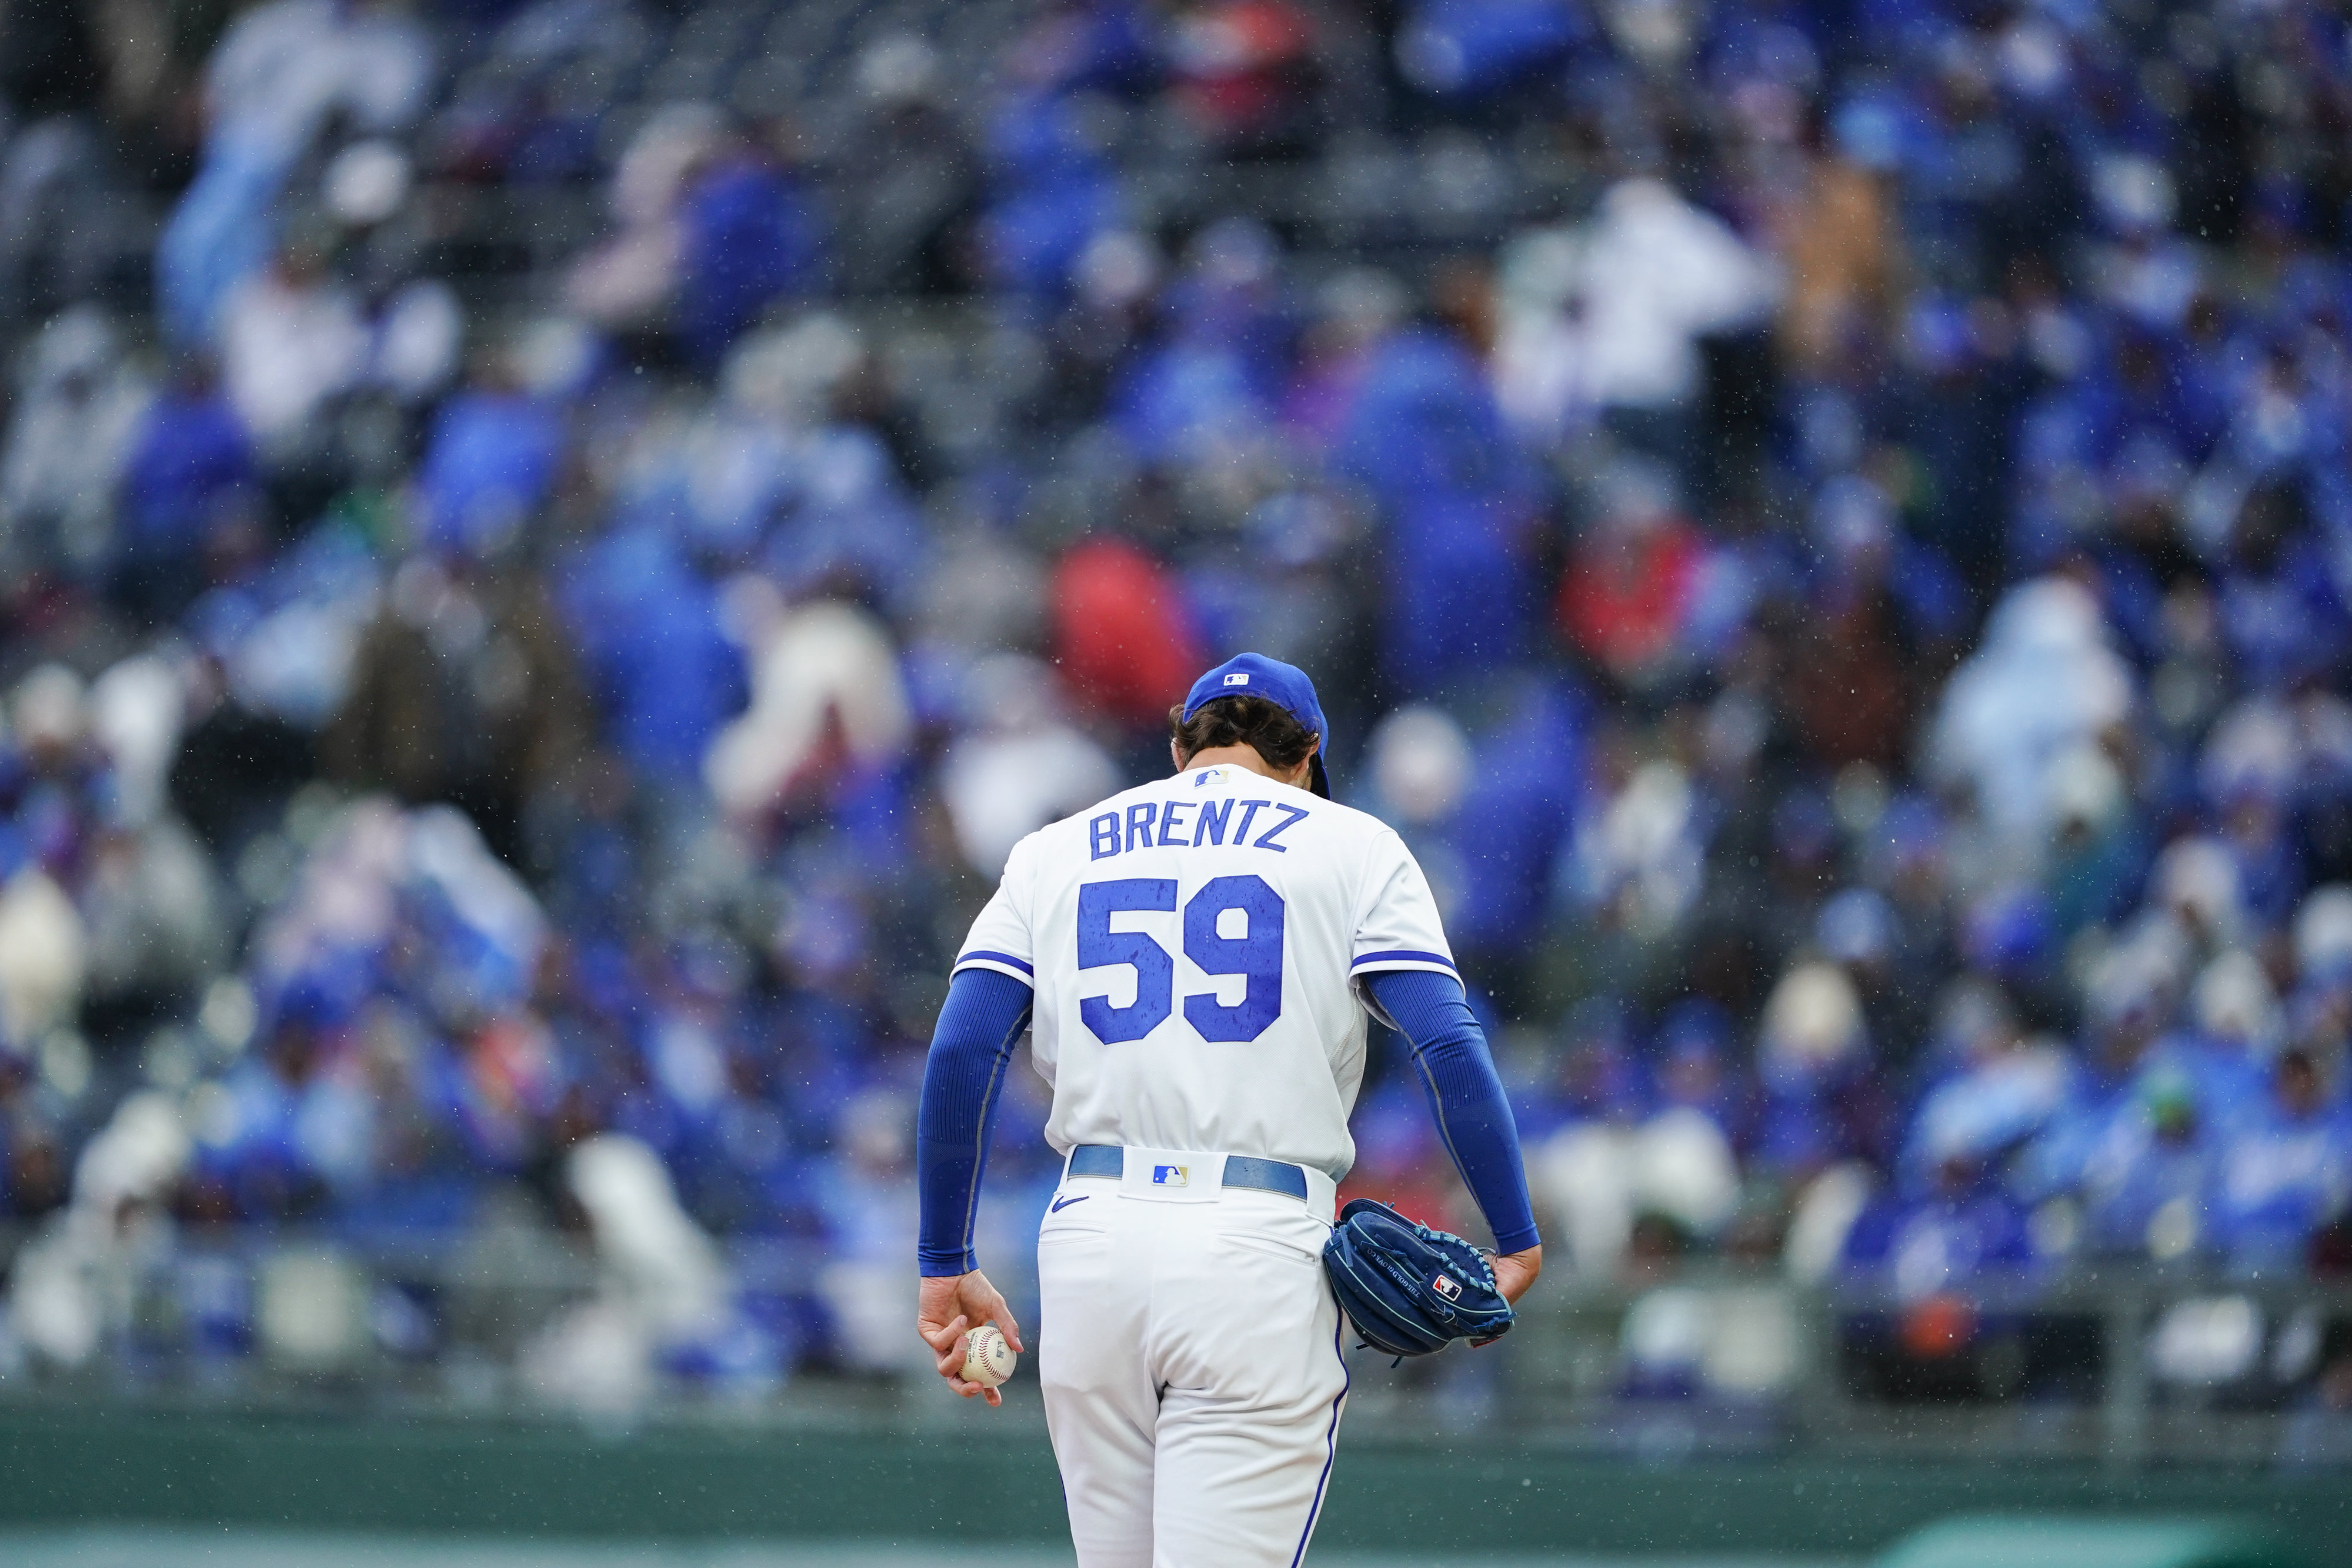 Jake Brentz #59 of the Kansas City Royals pitches against the Cleveland Guardians in the fifth inning during Opening Day at Kauffman Stadium on April 7, 2022 in Kansas City, Missouri.